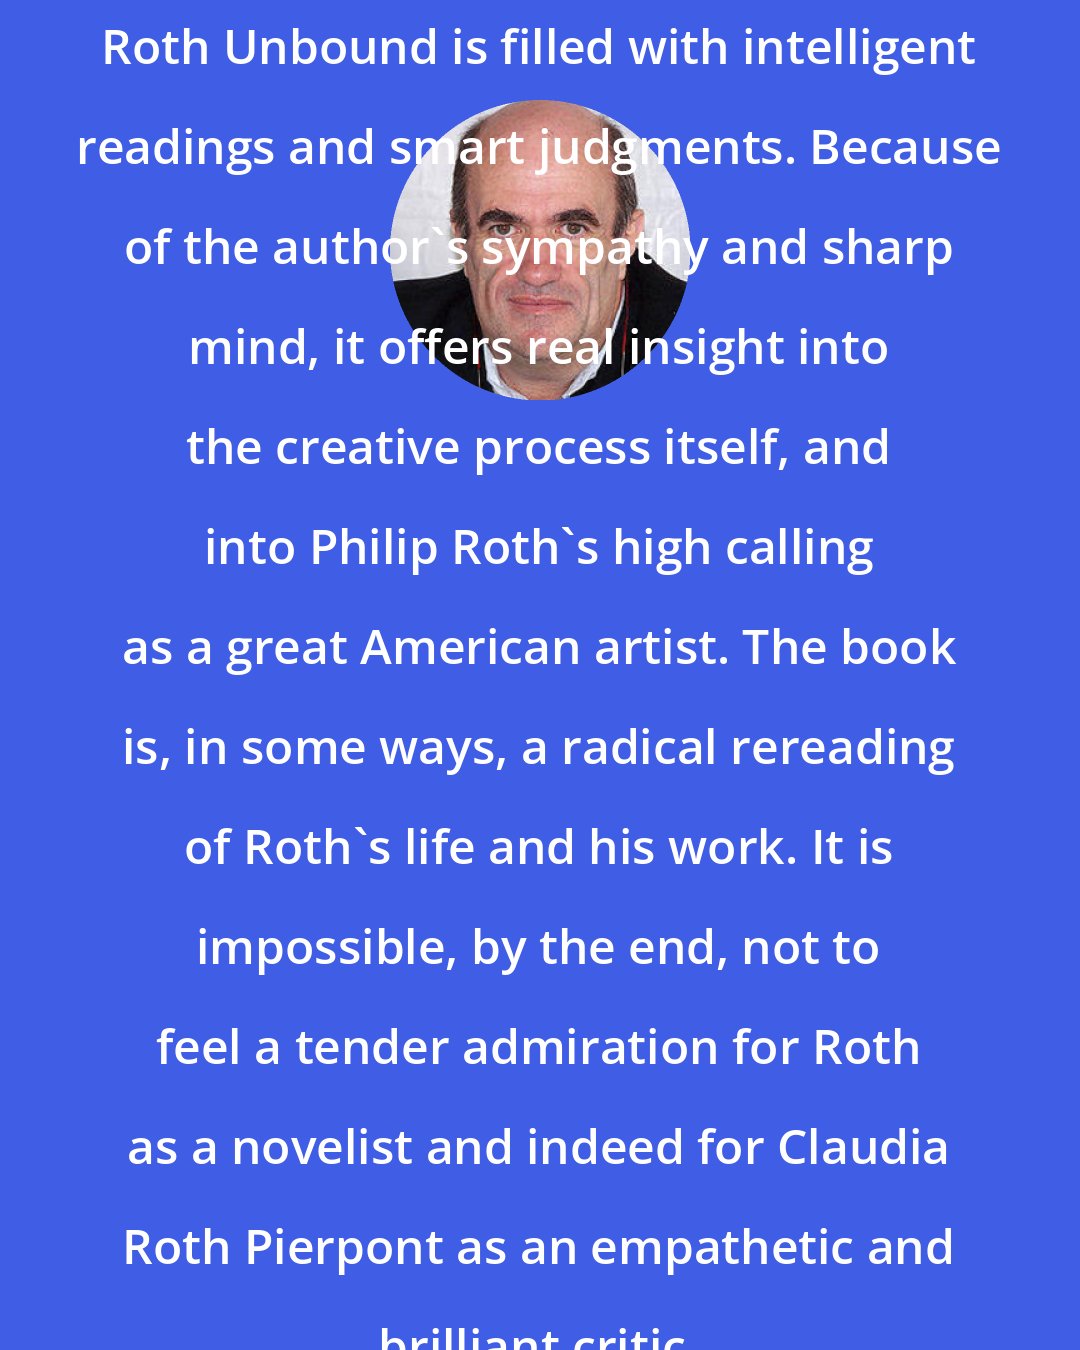 Colm Toibin: Roth Unbound is filled with intelligent readings and smart judgments. Because of the author's sympathy and sharp mind, it offers real insight into the creative process itself, and into Philip Roth's high calling as a great American artist. The book is, in some ways, a radical rereading of Roth's life and his work. It is impossible, by the end, not to feel a tender admiration for Roth as a novelist and indeed for Claudia Roth Pierpont as an empathetic and brilliant critic.